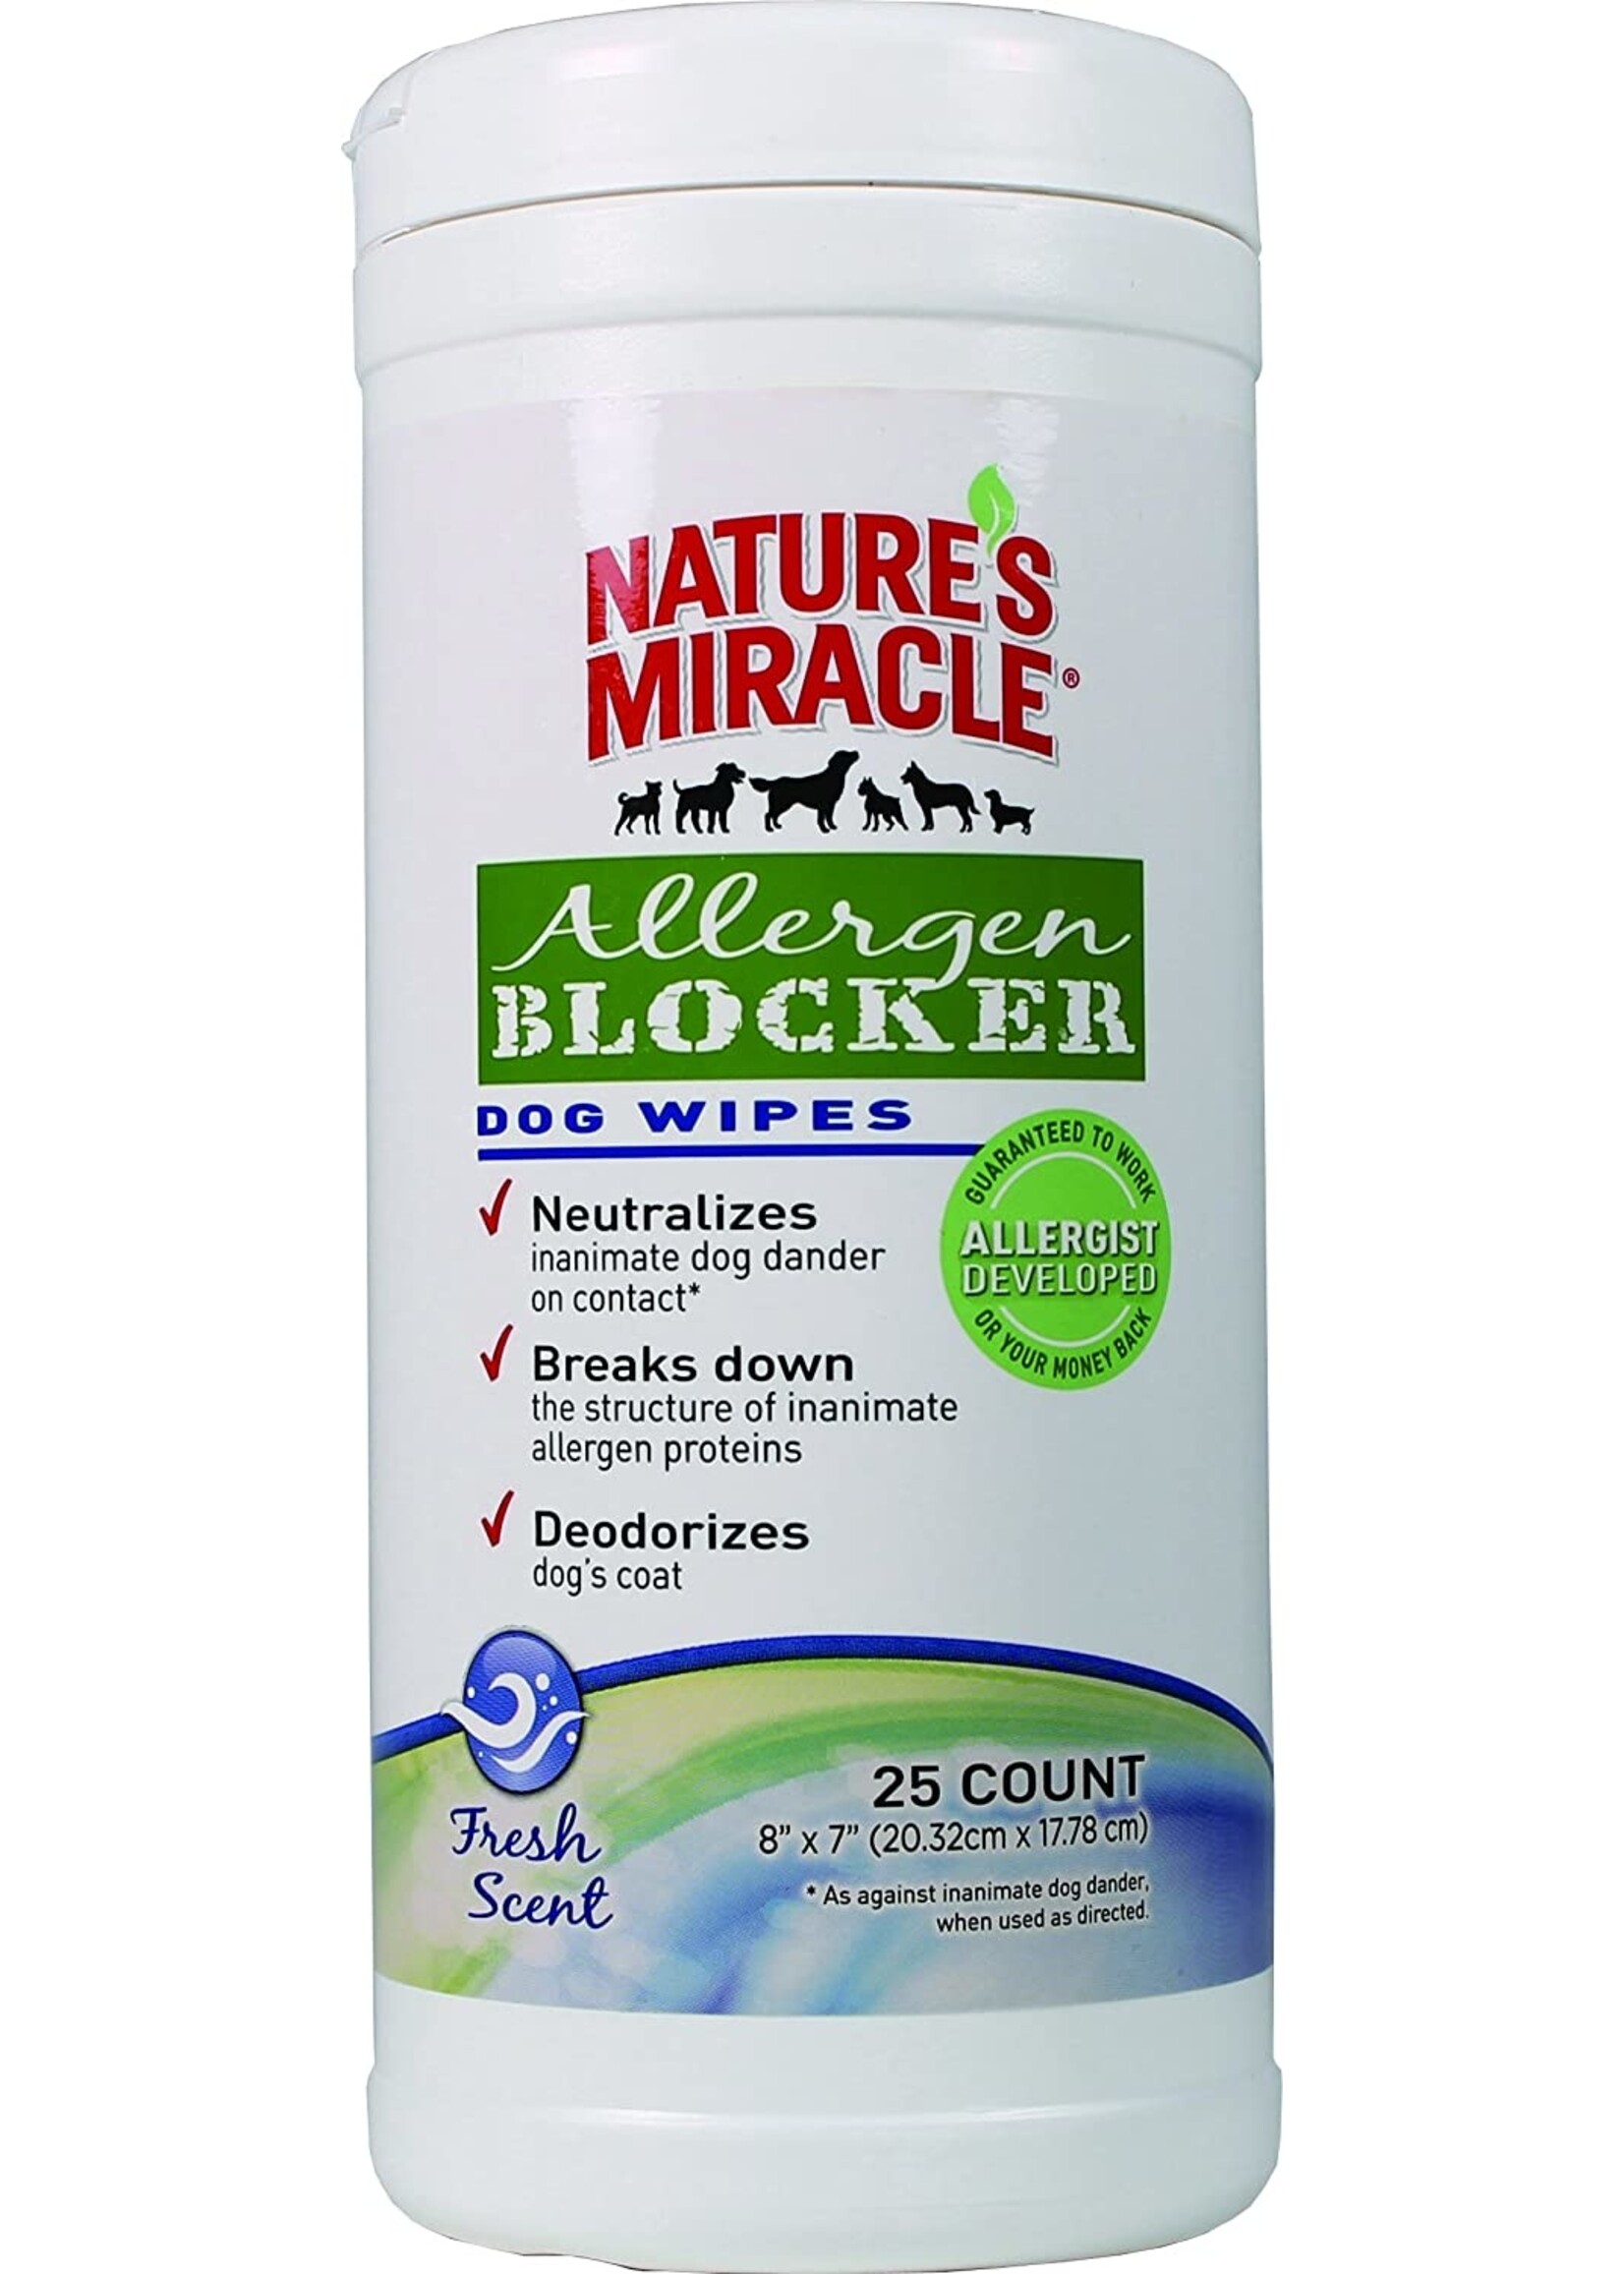 Nature's Miracle Nature's Miracle Allergen Blockers Wipes 25Count